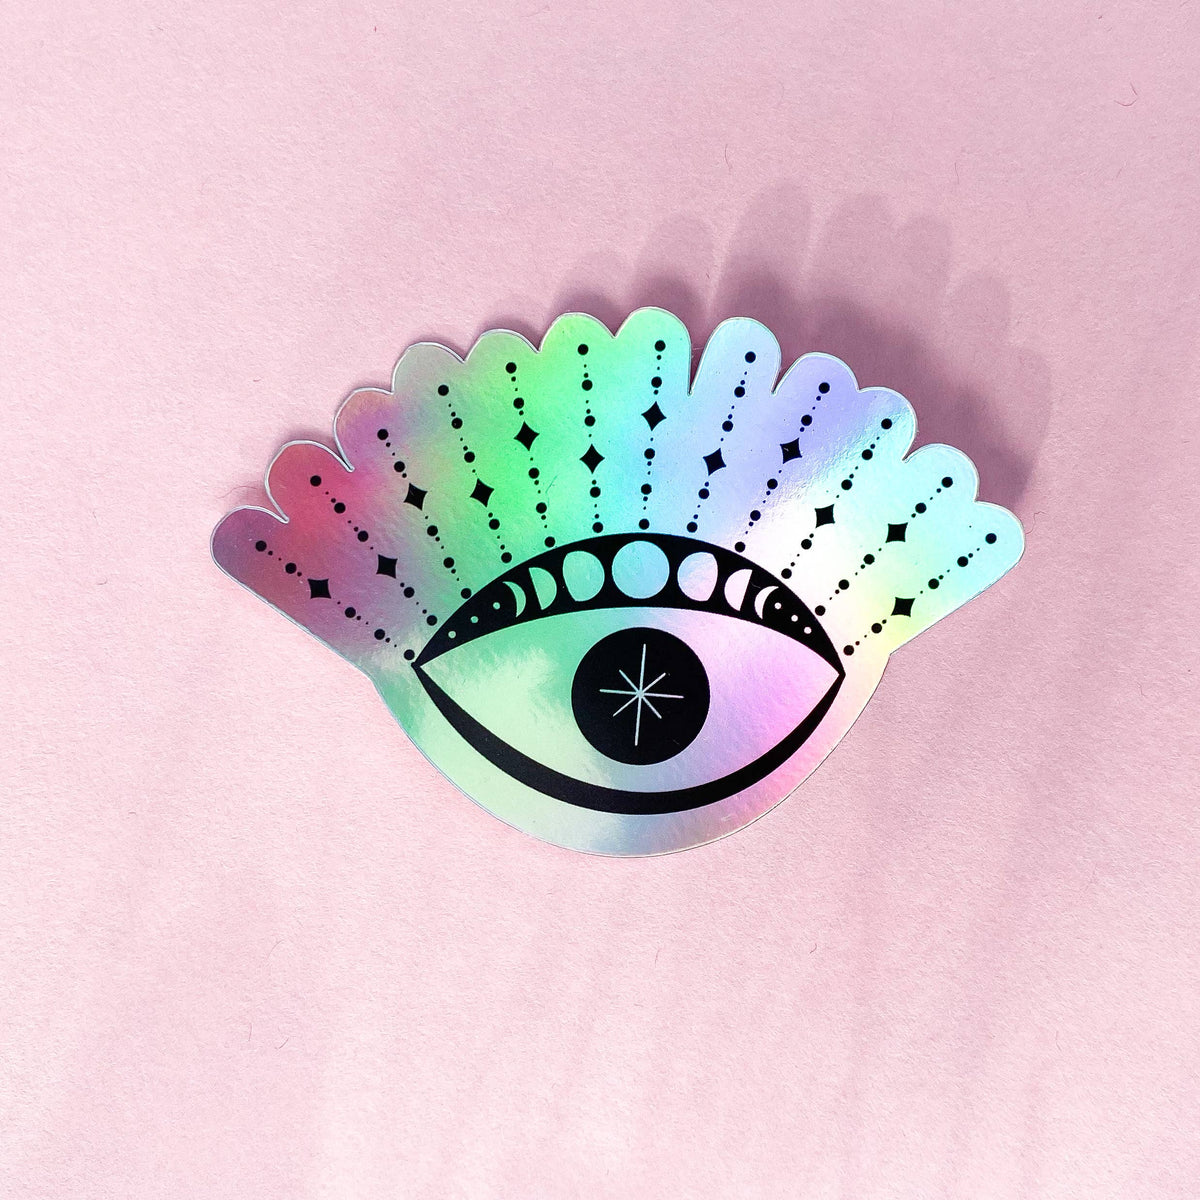 Holographic Evil Eye Moon Phase Sticker | Witchy Occult